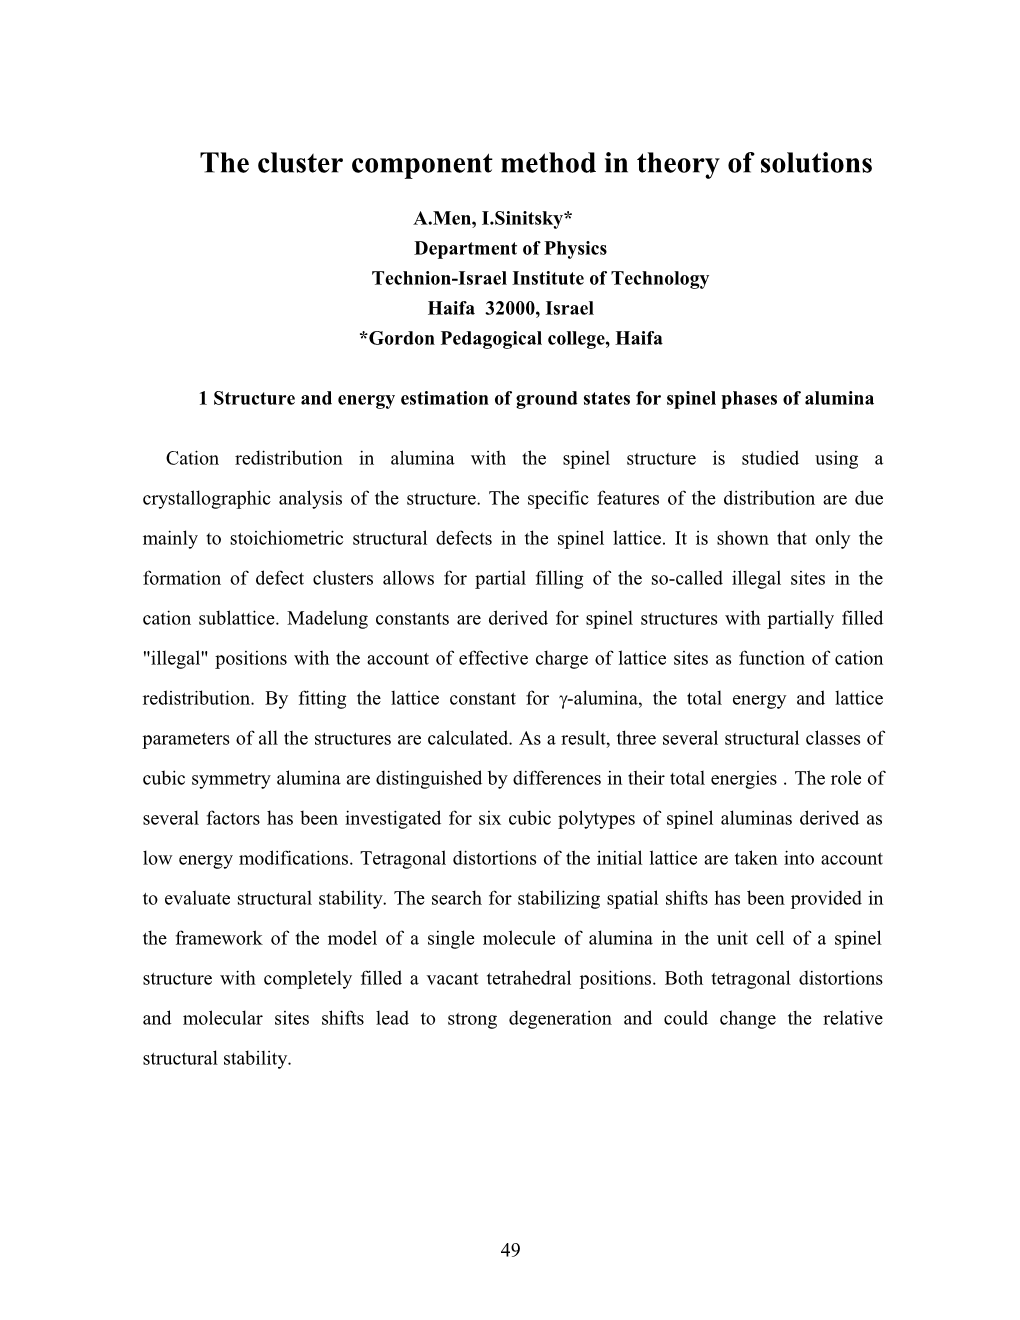 The Cluster Component Method in Theory of Solutions